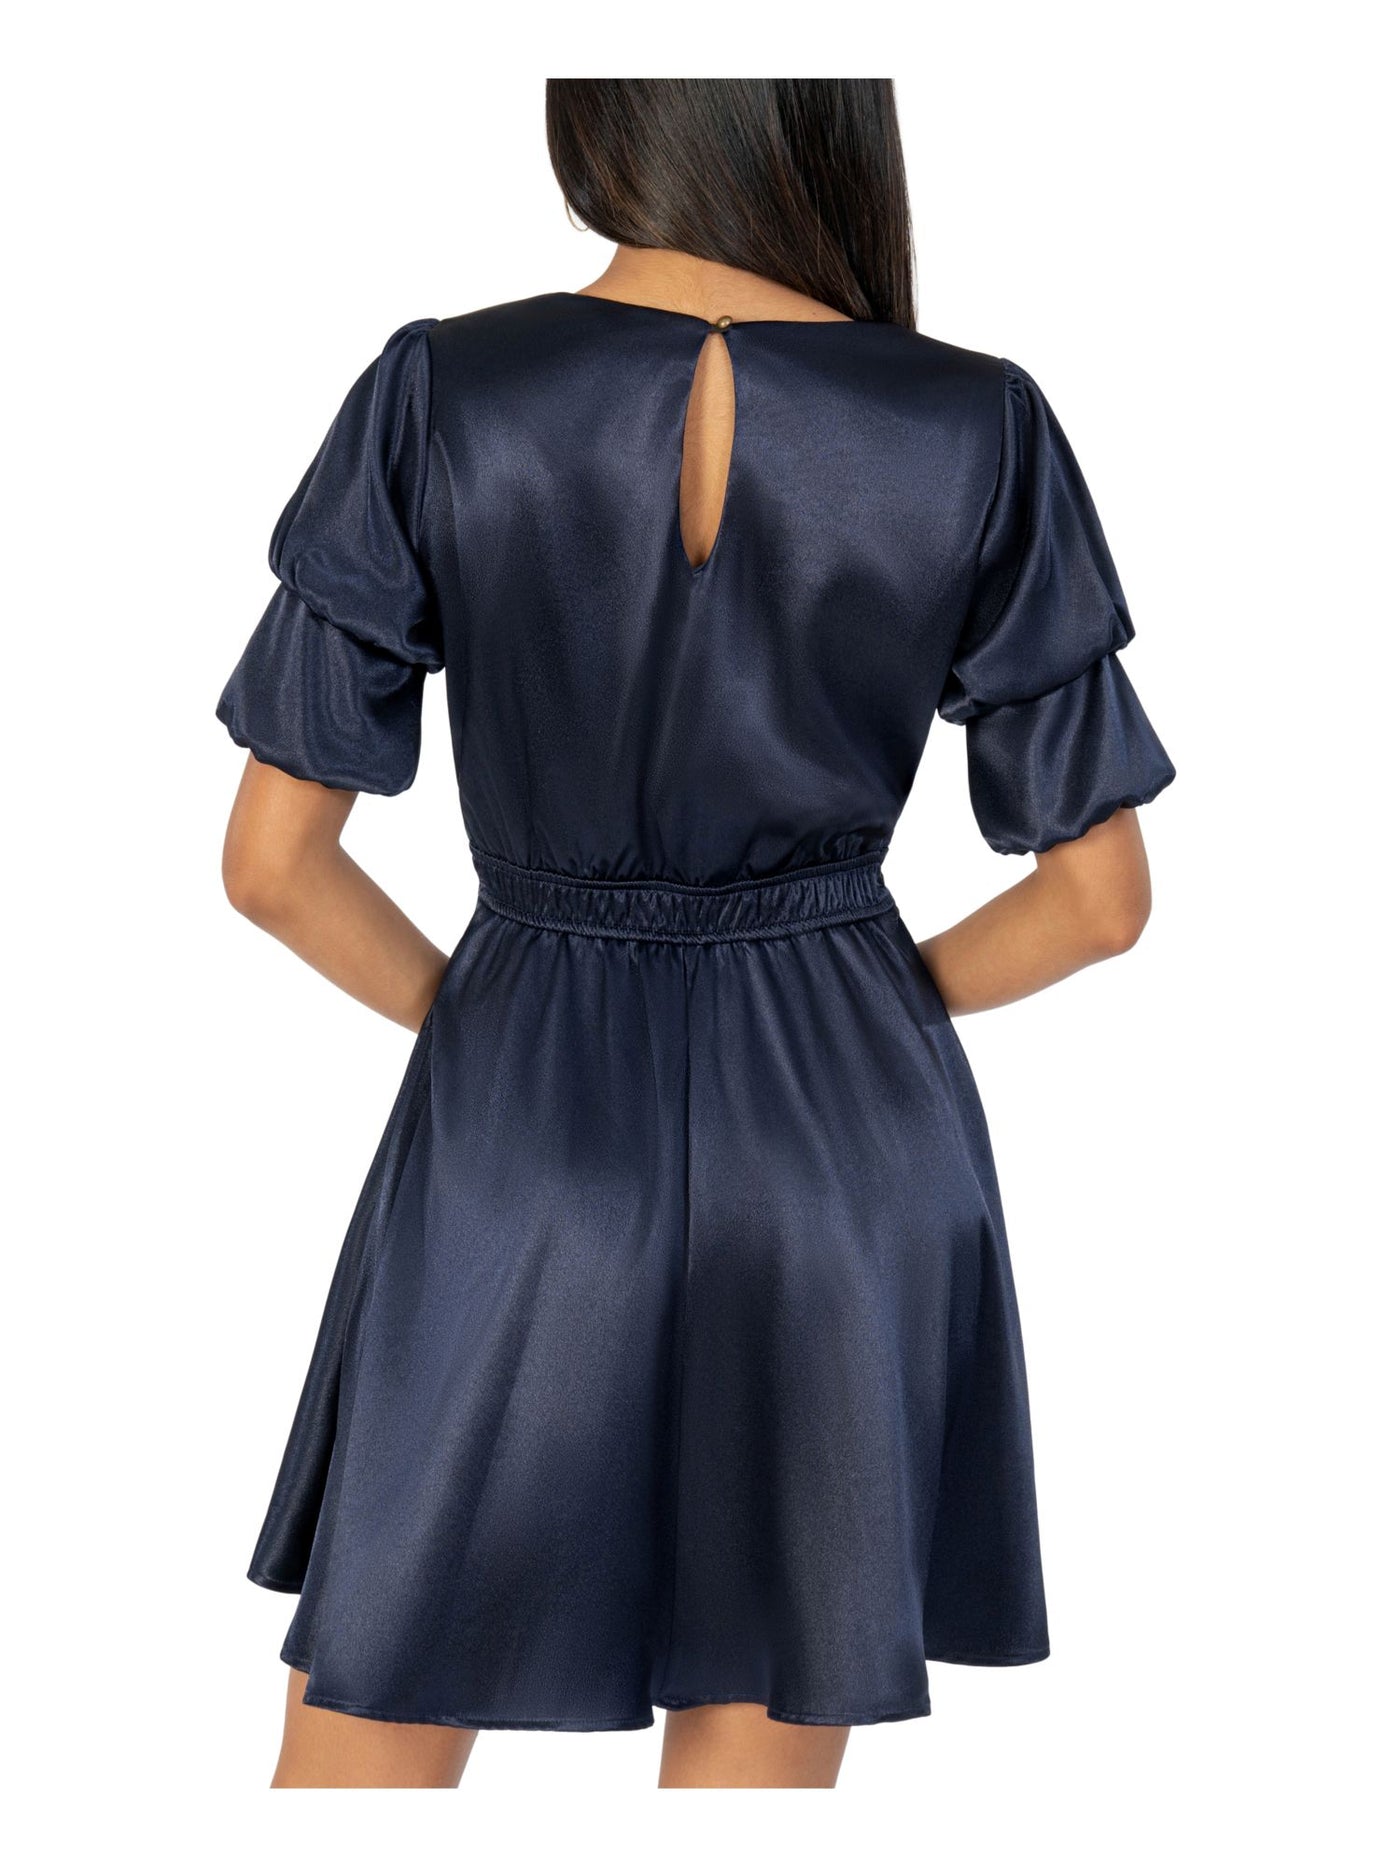 SPEECHLESS Womens Navy Stretch Pocketed Lined Short Sleeve V Neck Short Party Fit + Flare Dress 7